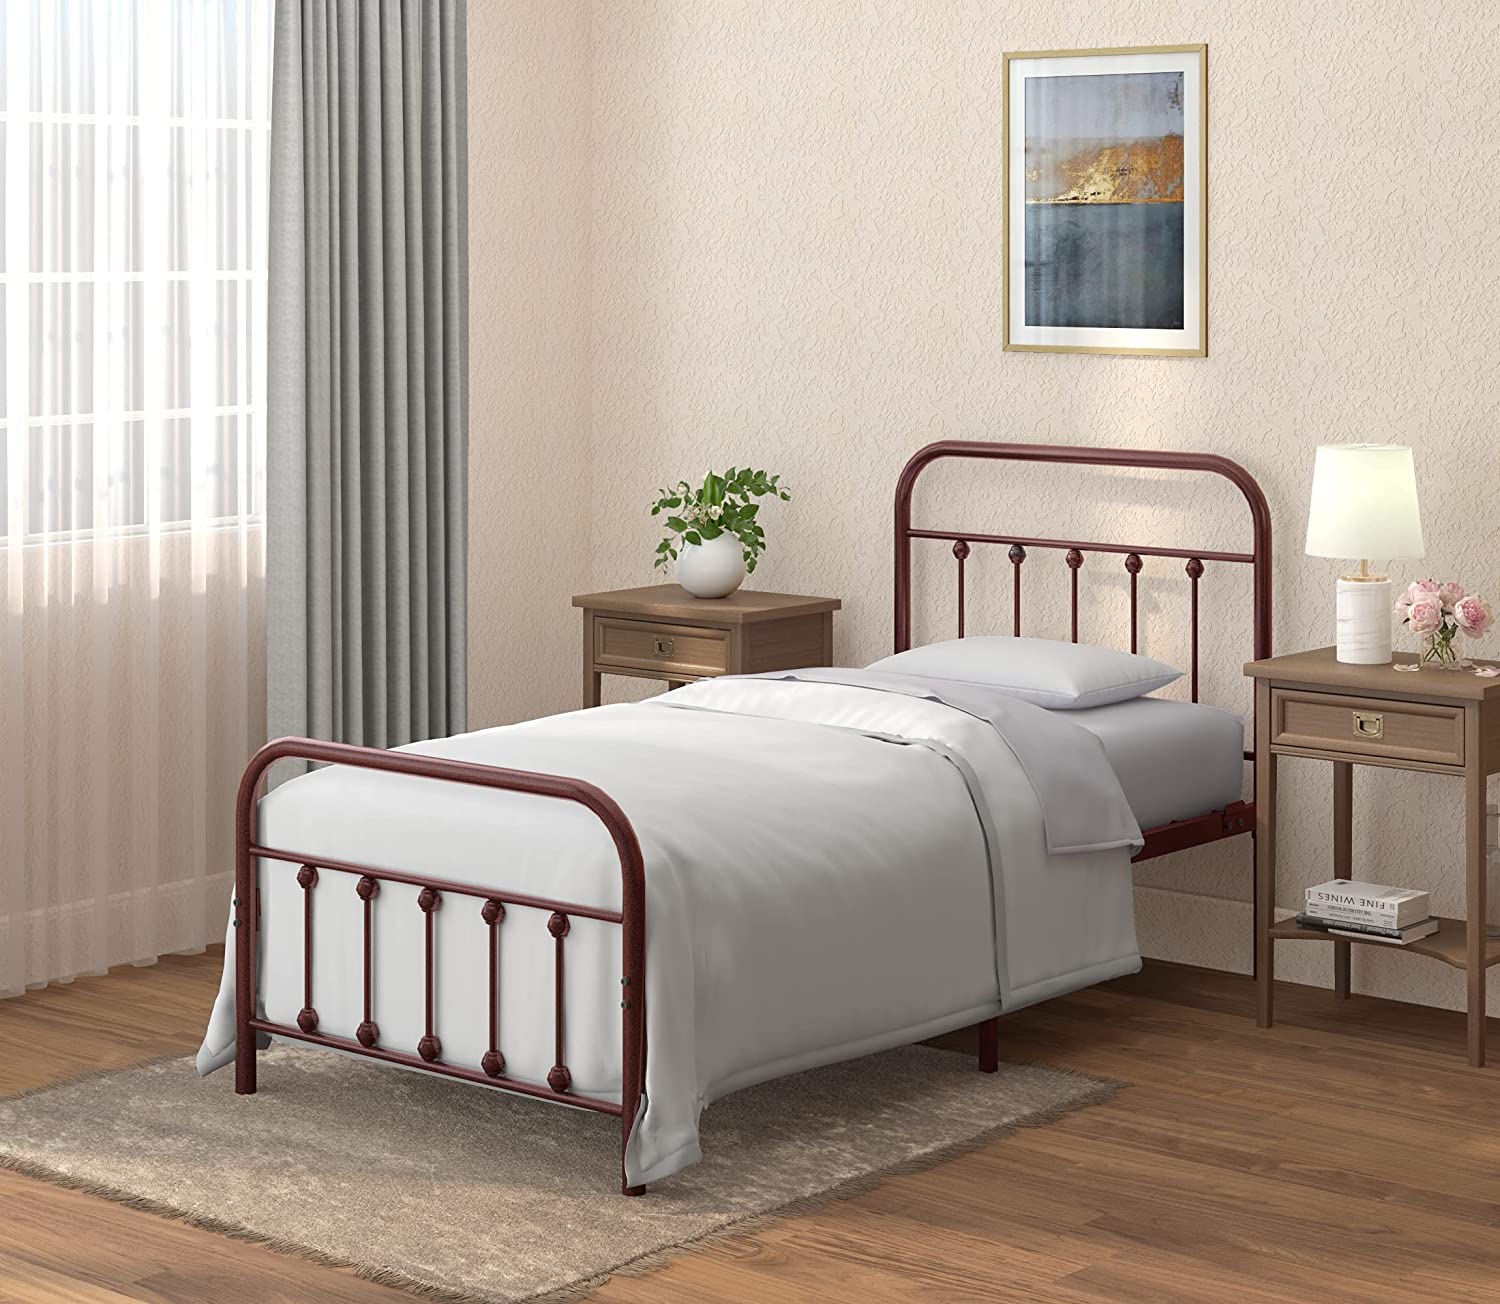 AMBEE21 CASTLEBEDS Vintage Twin Metal Bed Frame with Headboard and Footboard - $85